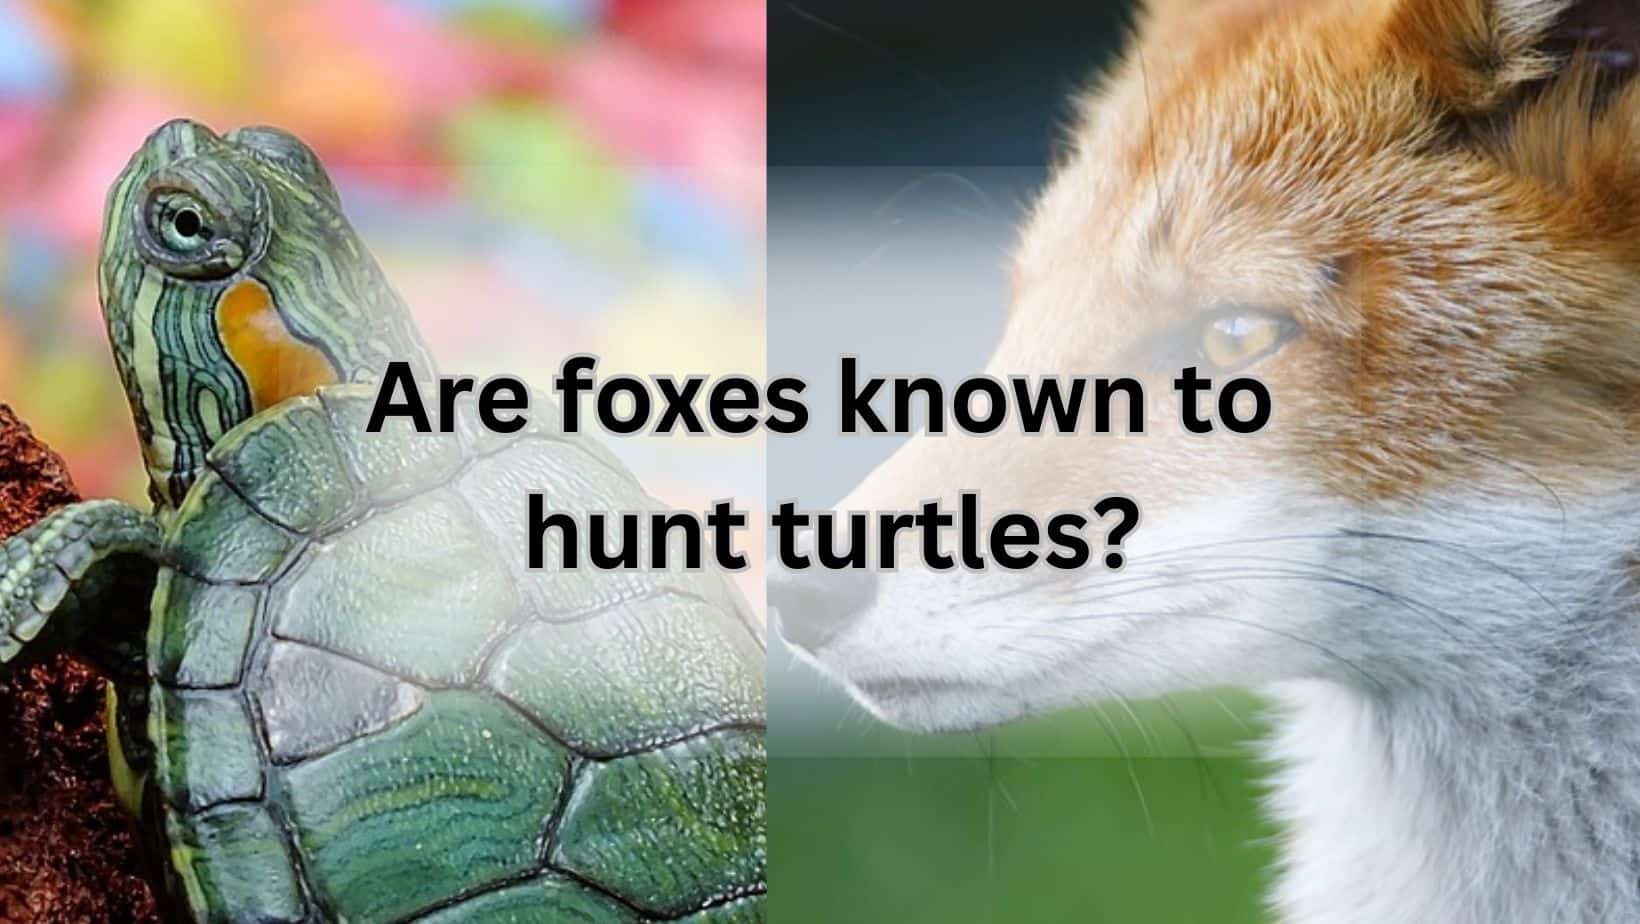 Are foxes known to hunt turtles?